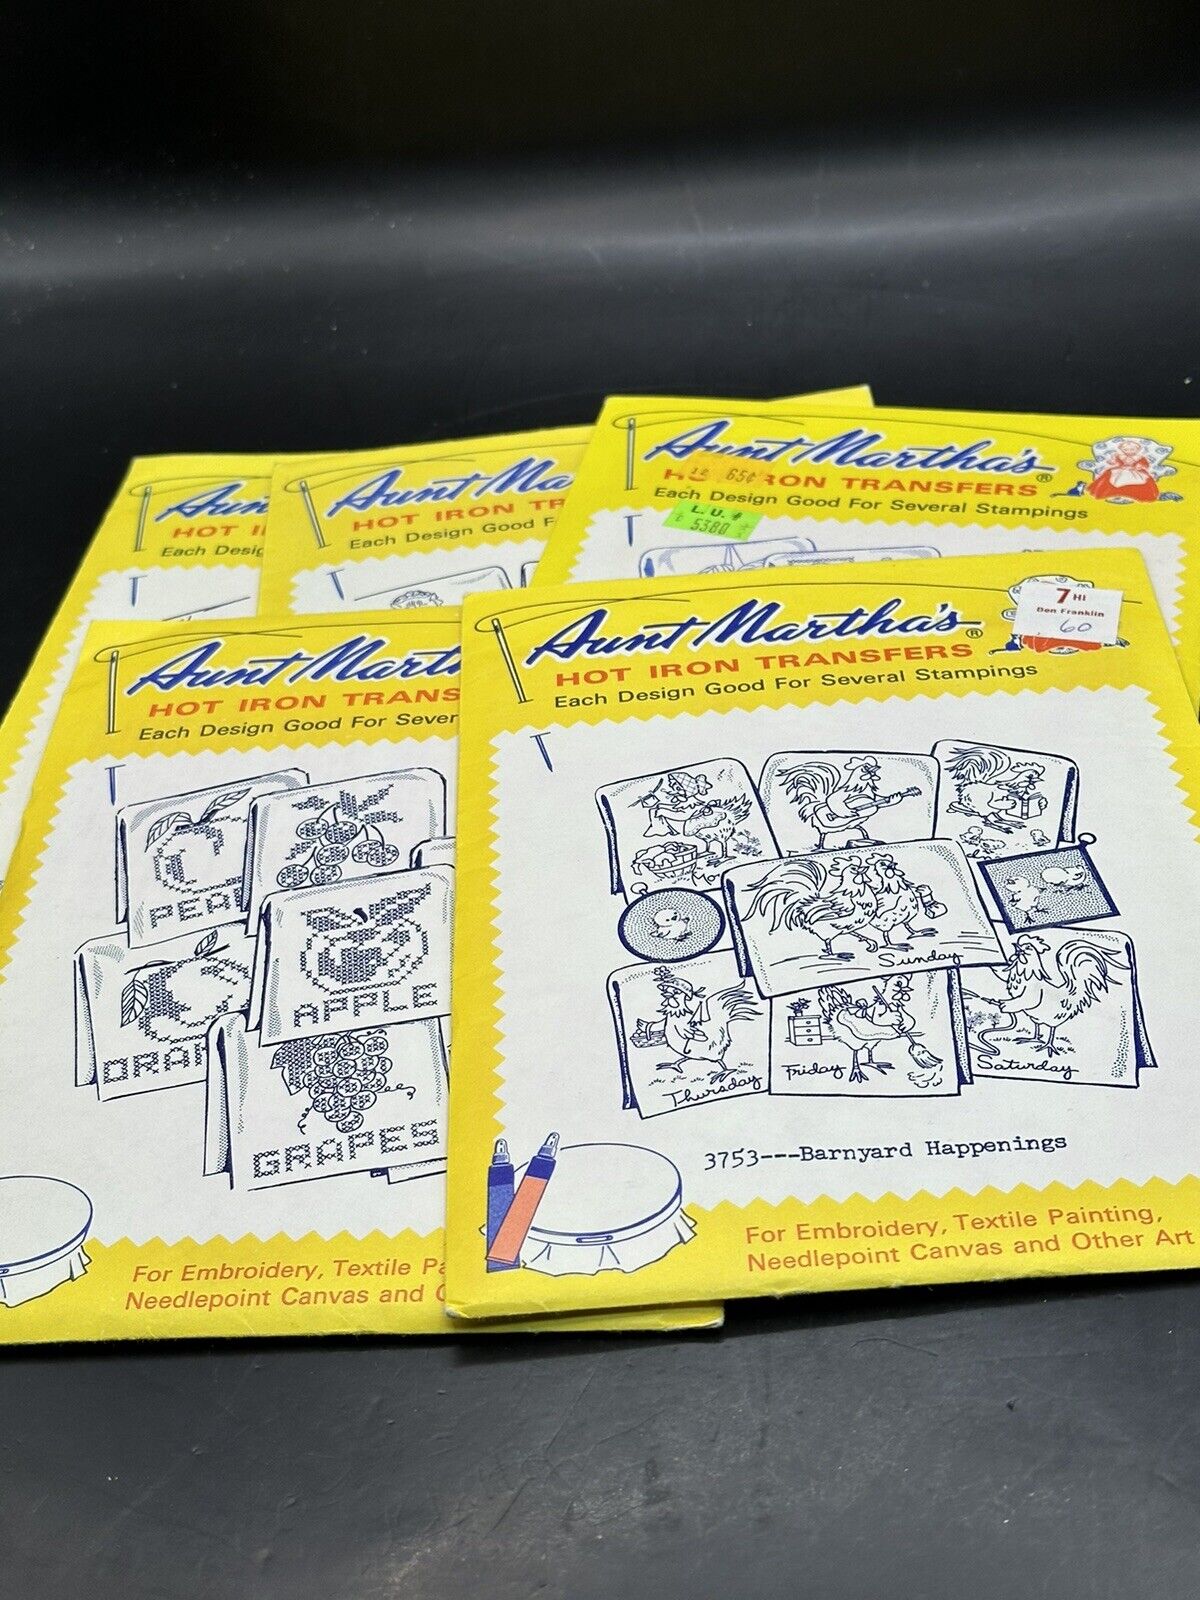 Lot of 5 Aunt Martha\'s Hot Iron Transfers for Embroidery & More Designs Lot 2